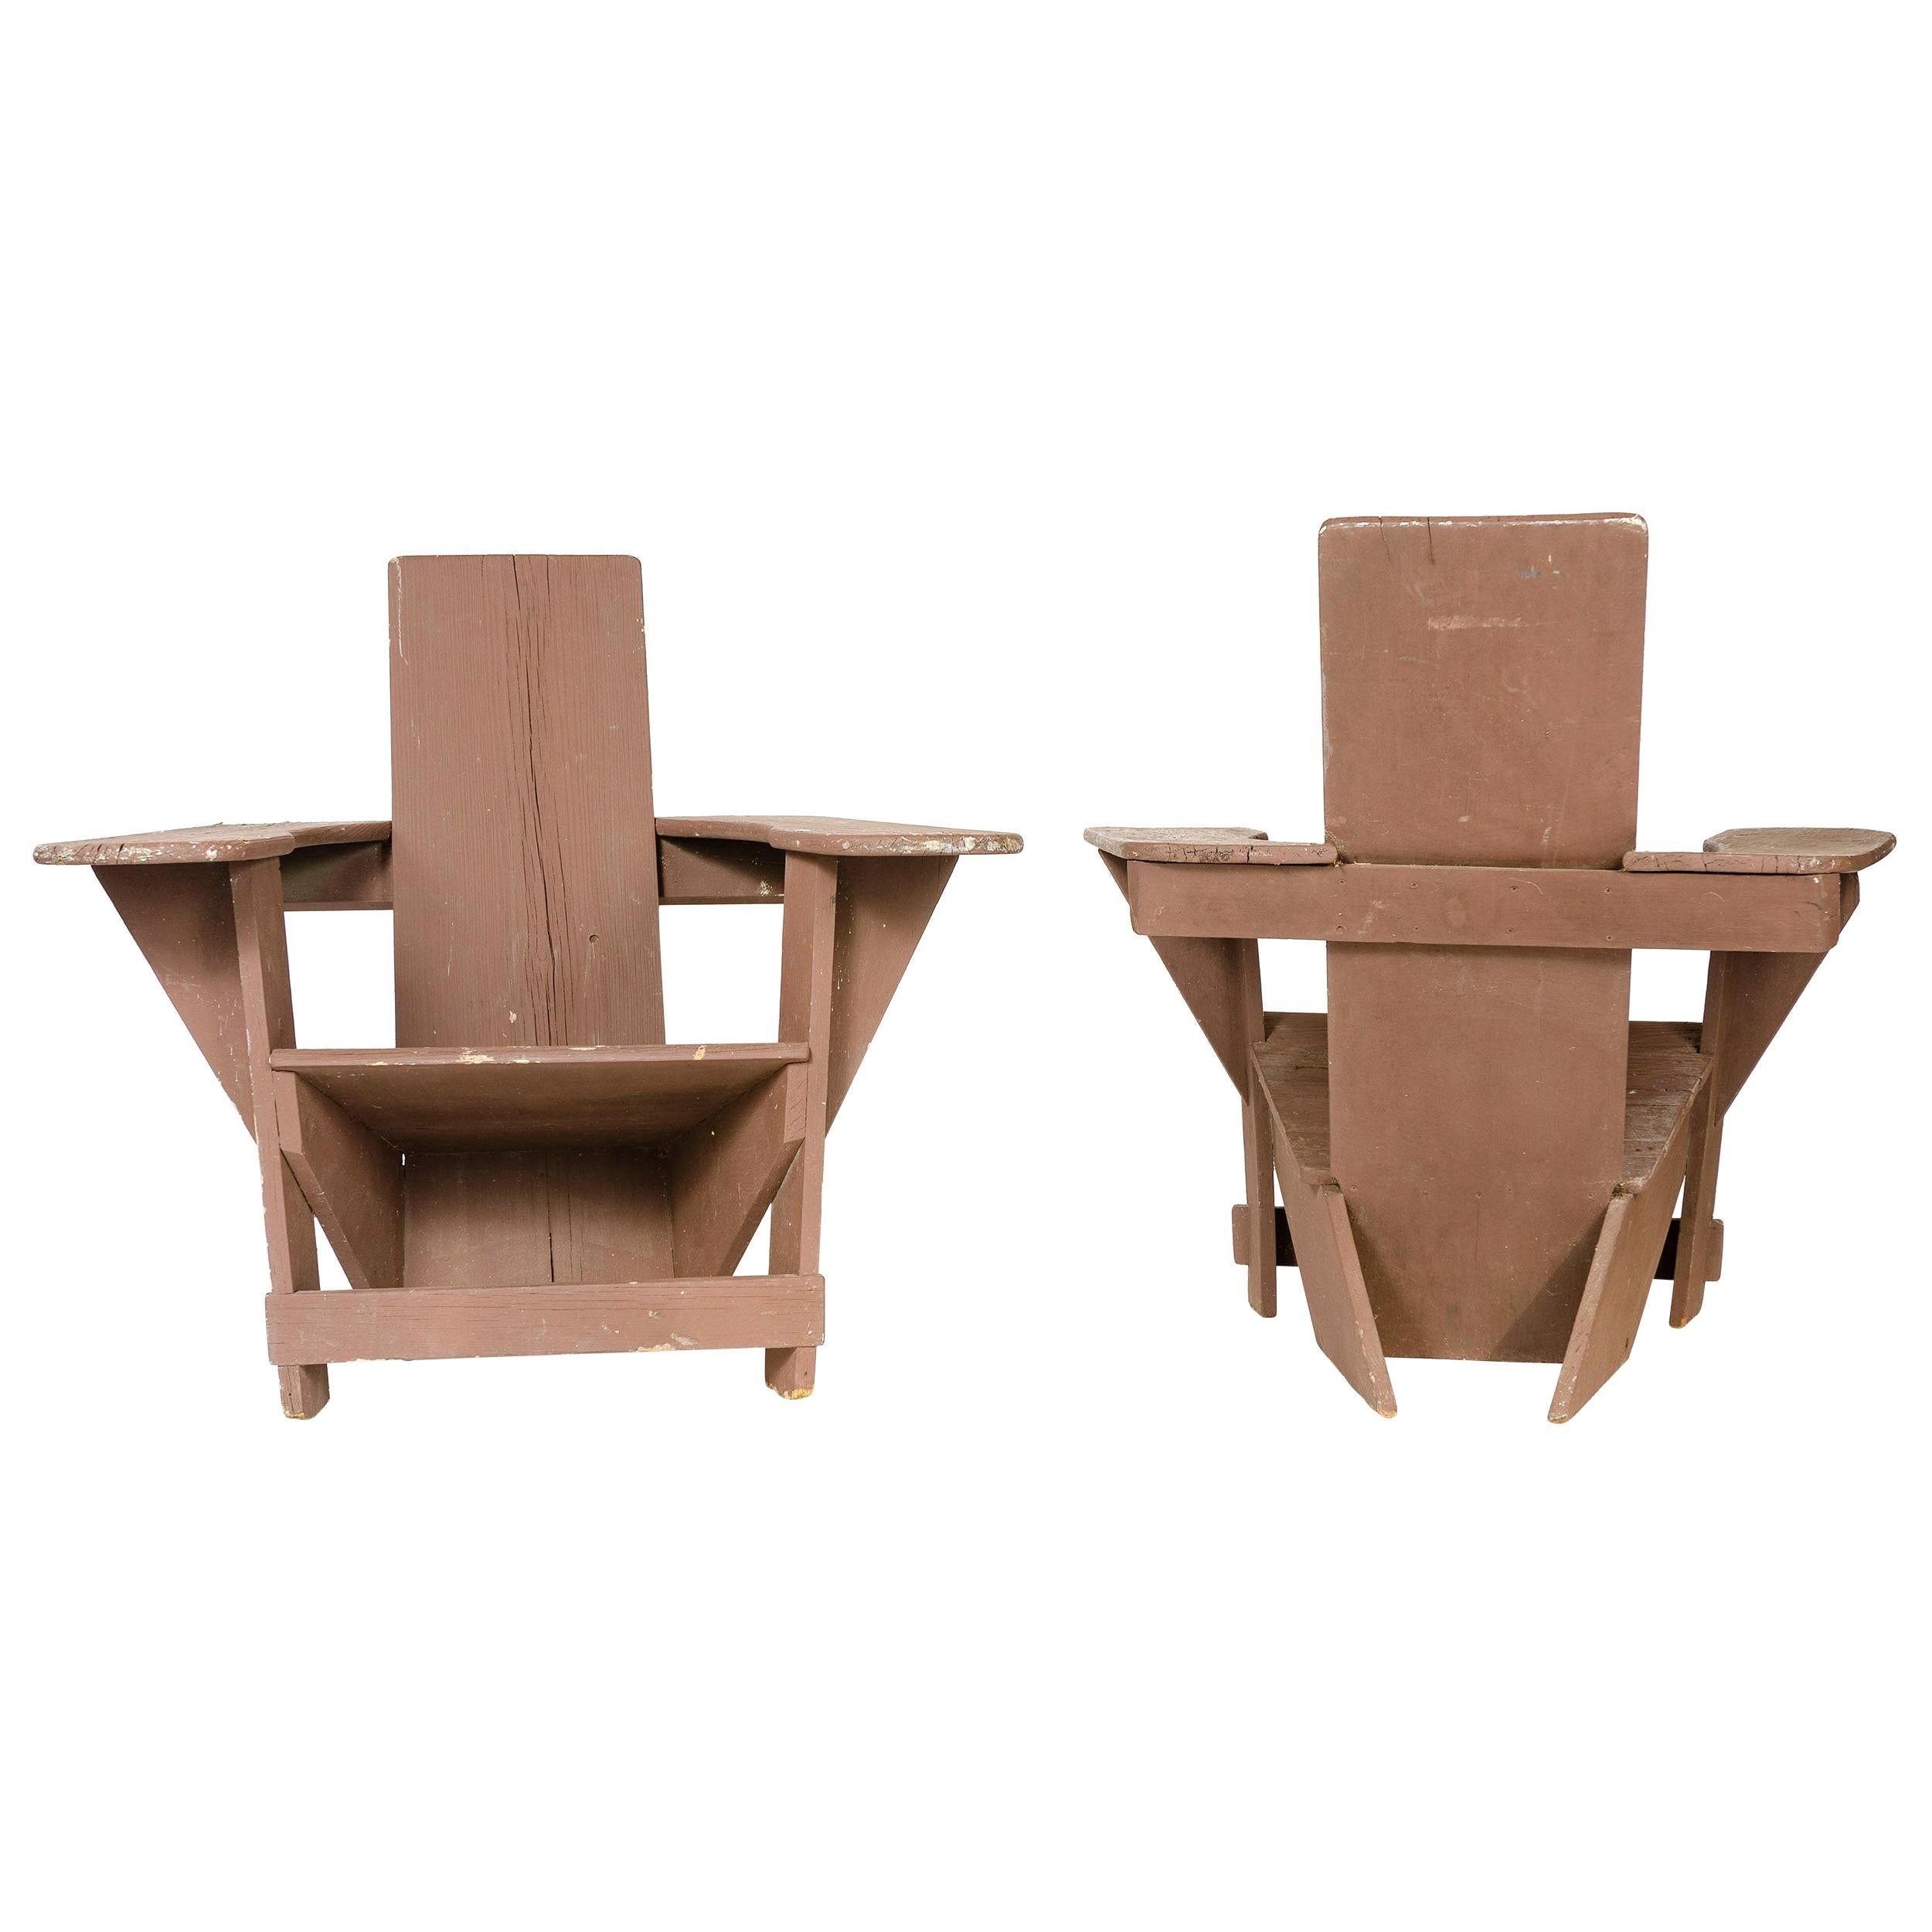 1910s Pair of Westport Lounge Chairs by Thomas Lee for Harry Bunnell